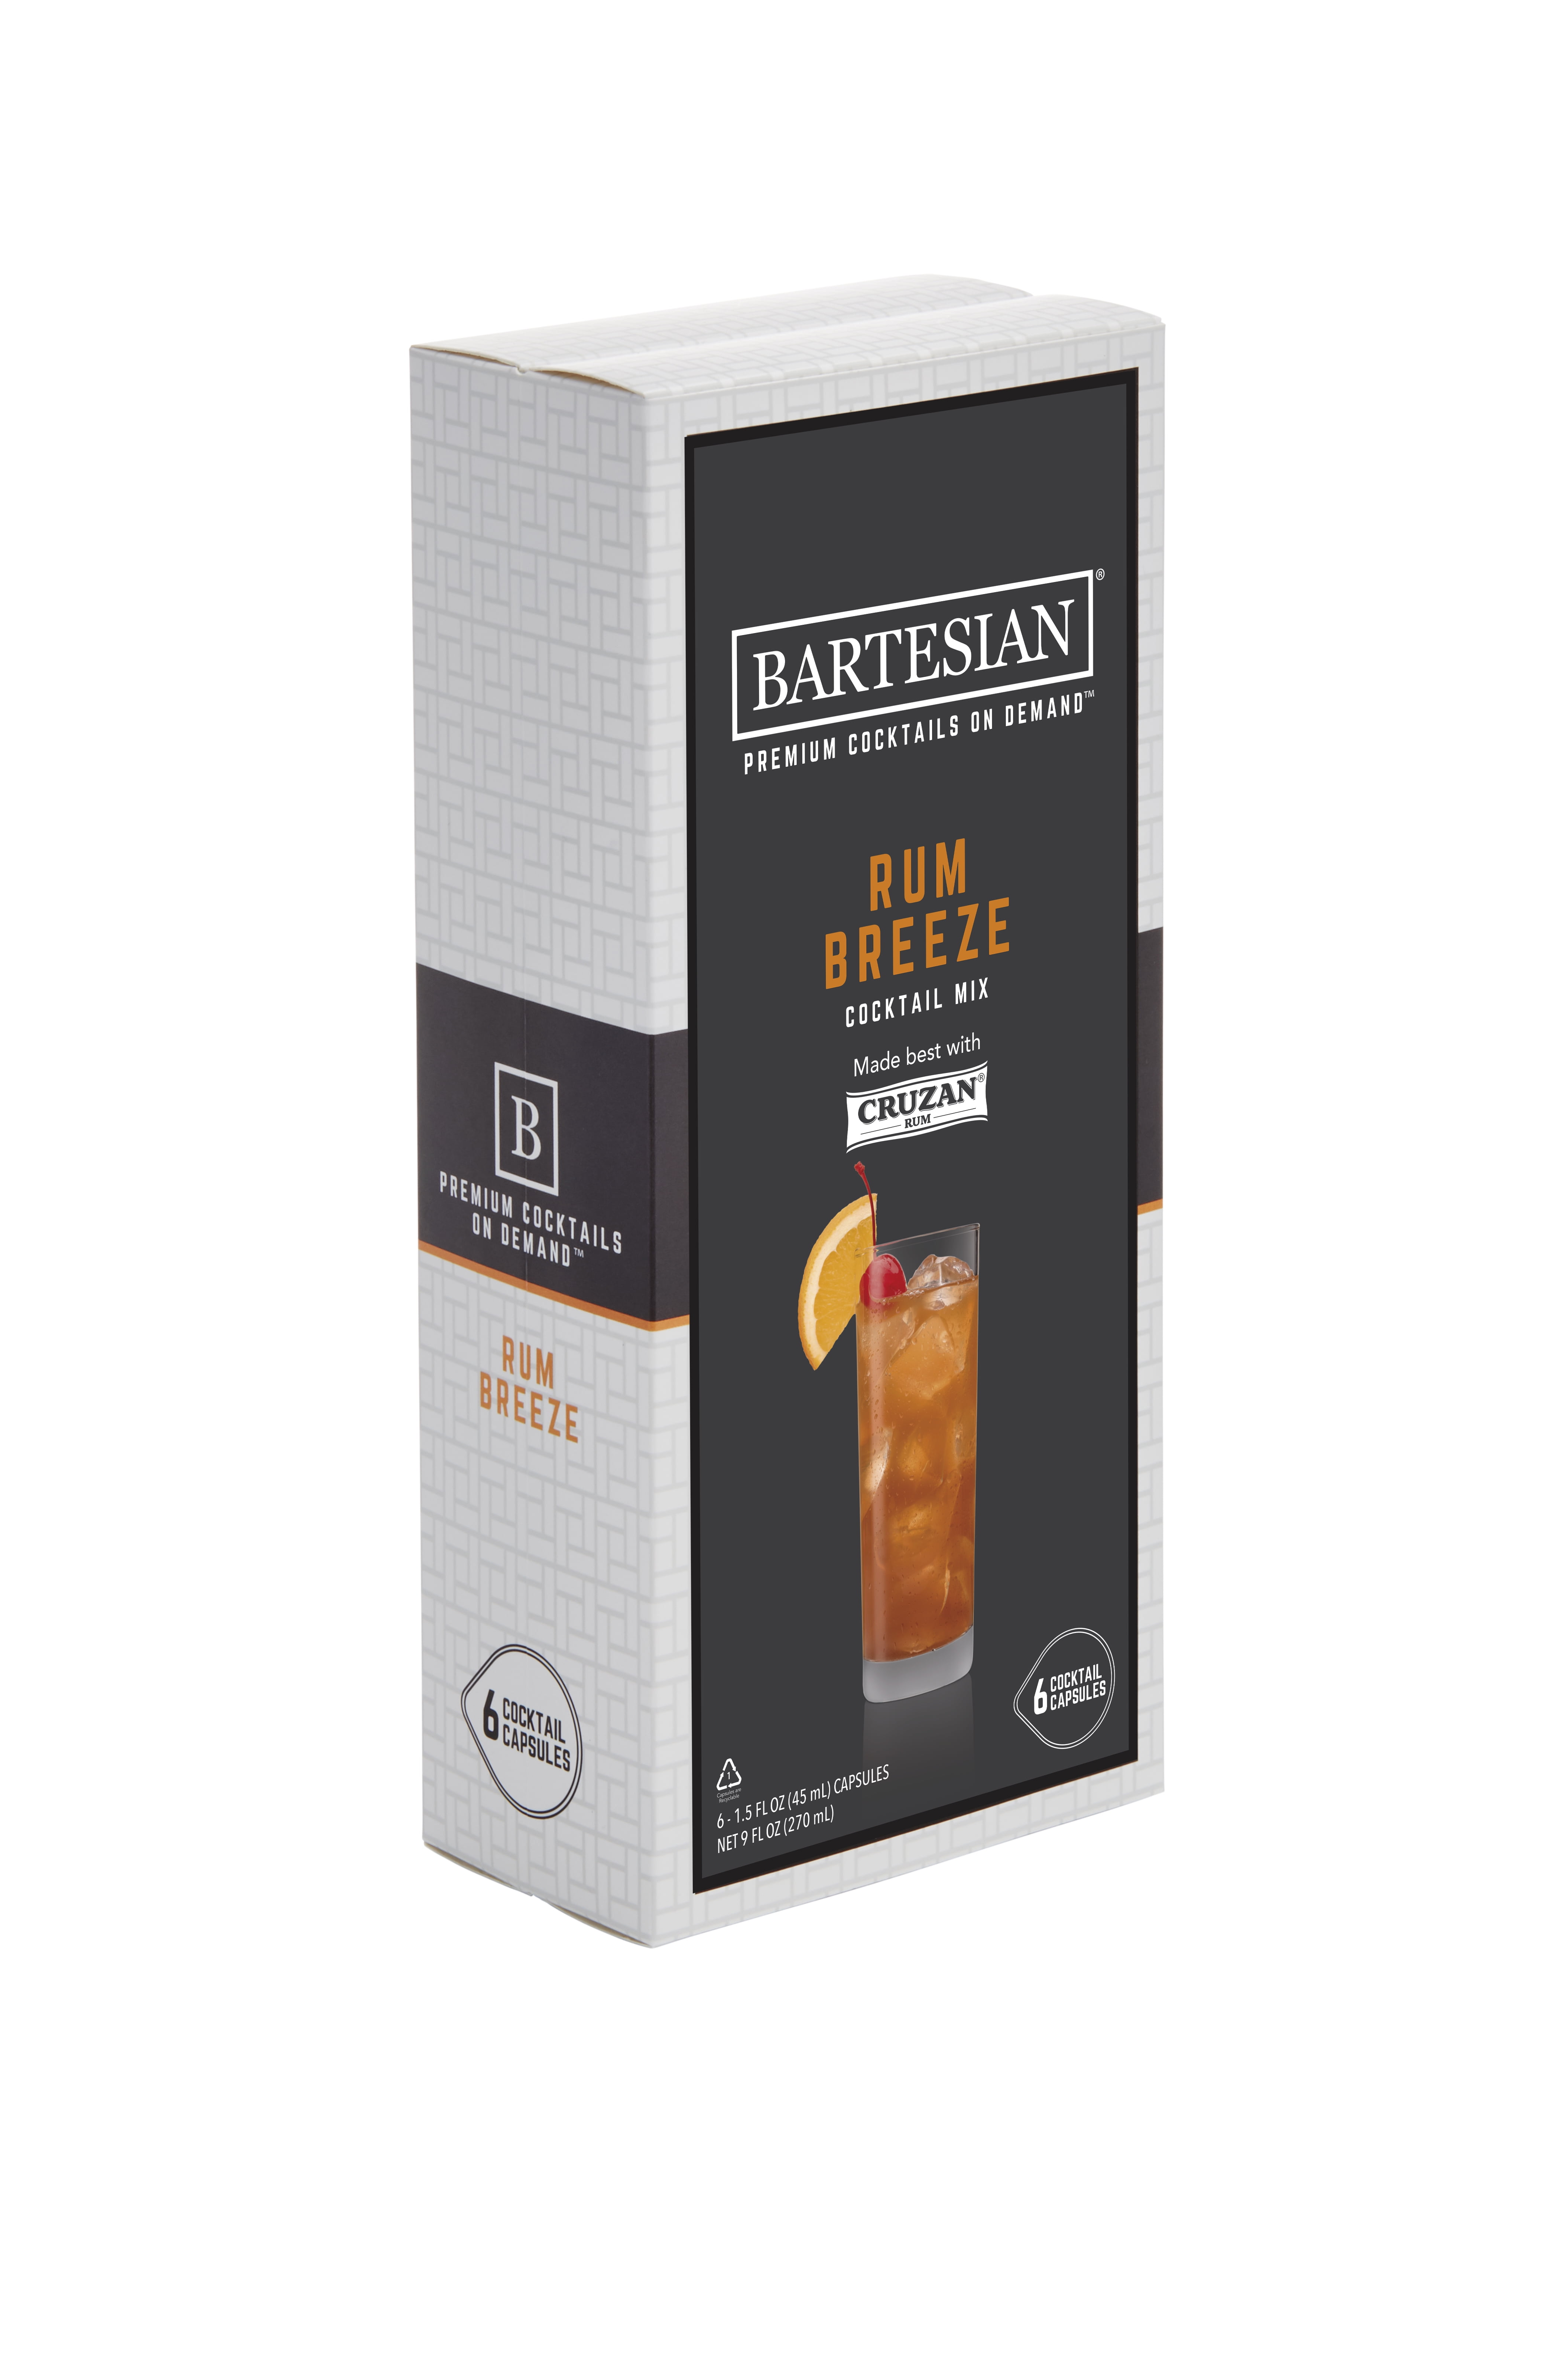 Bartesian Rum Breeze Cocktail Drink Mixes Capsules, Variety Pack